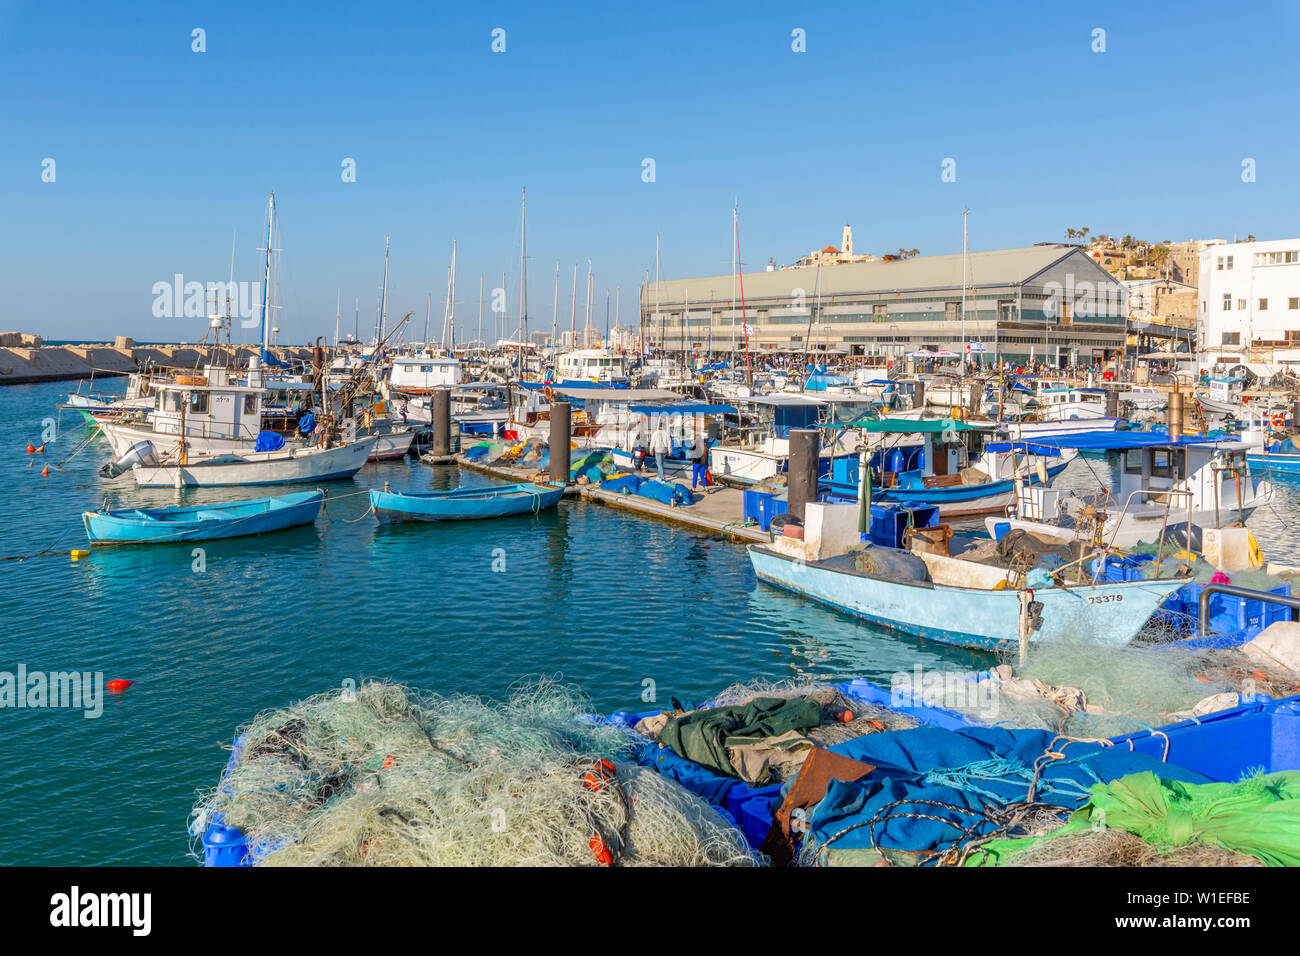 View of boats in the harbour, Jaffa Old Town, Tel Aviv, Israel, Middle East Stock Photo